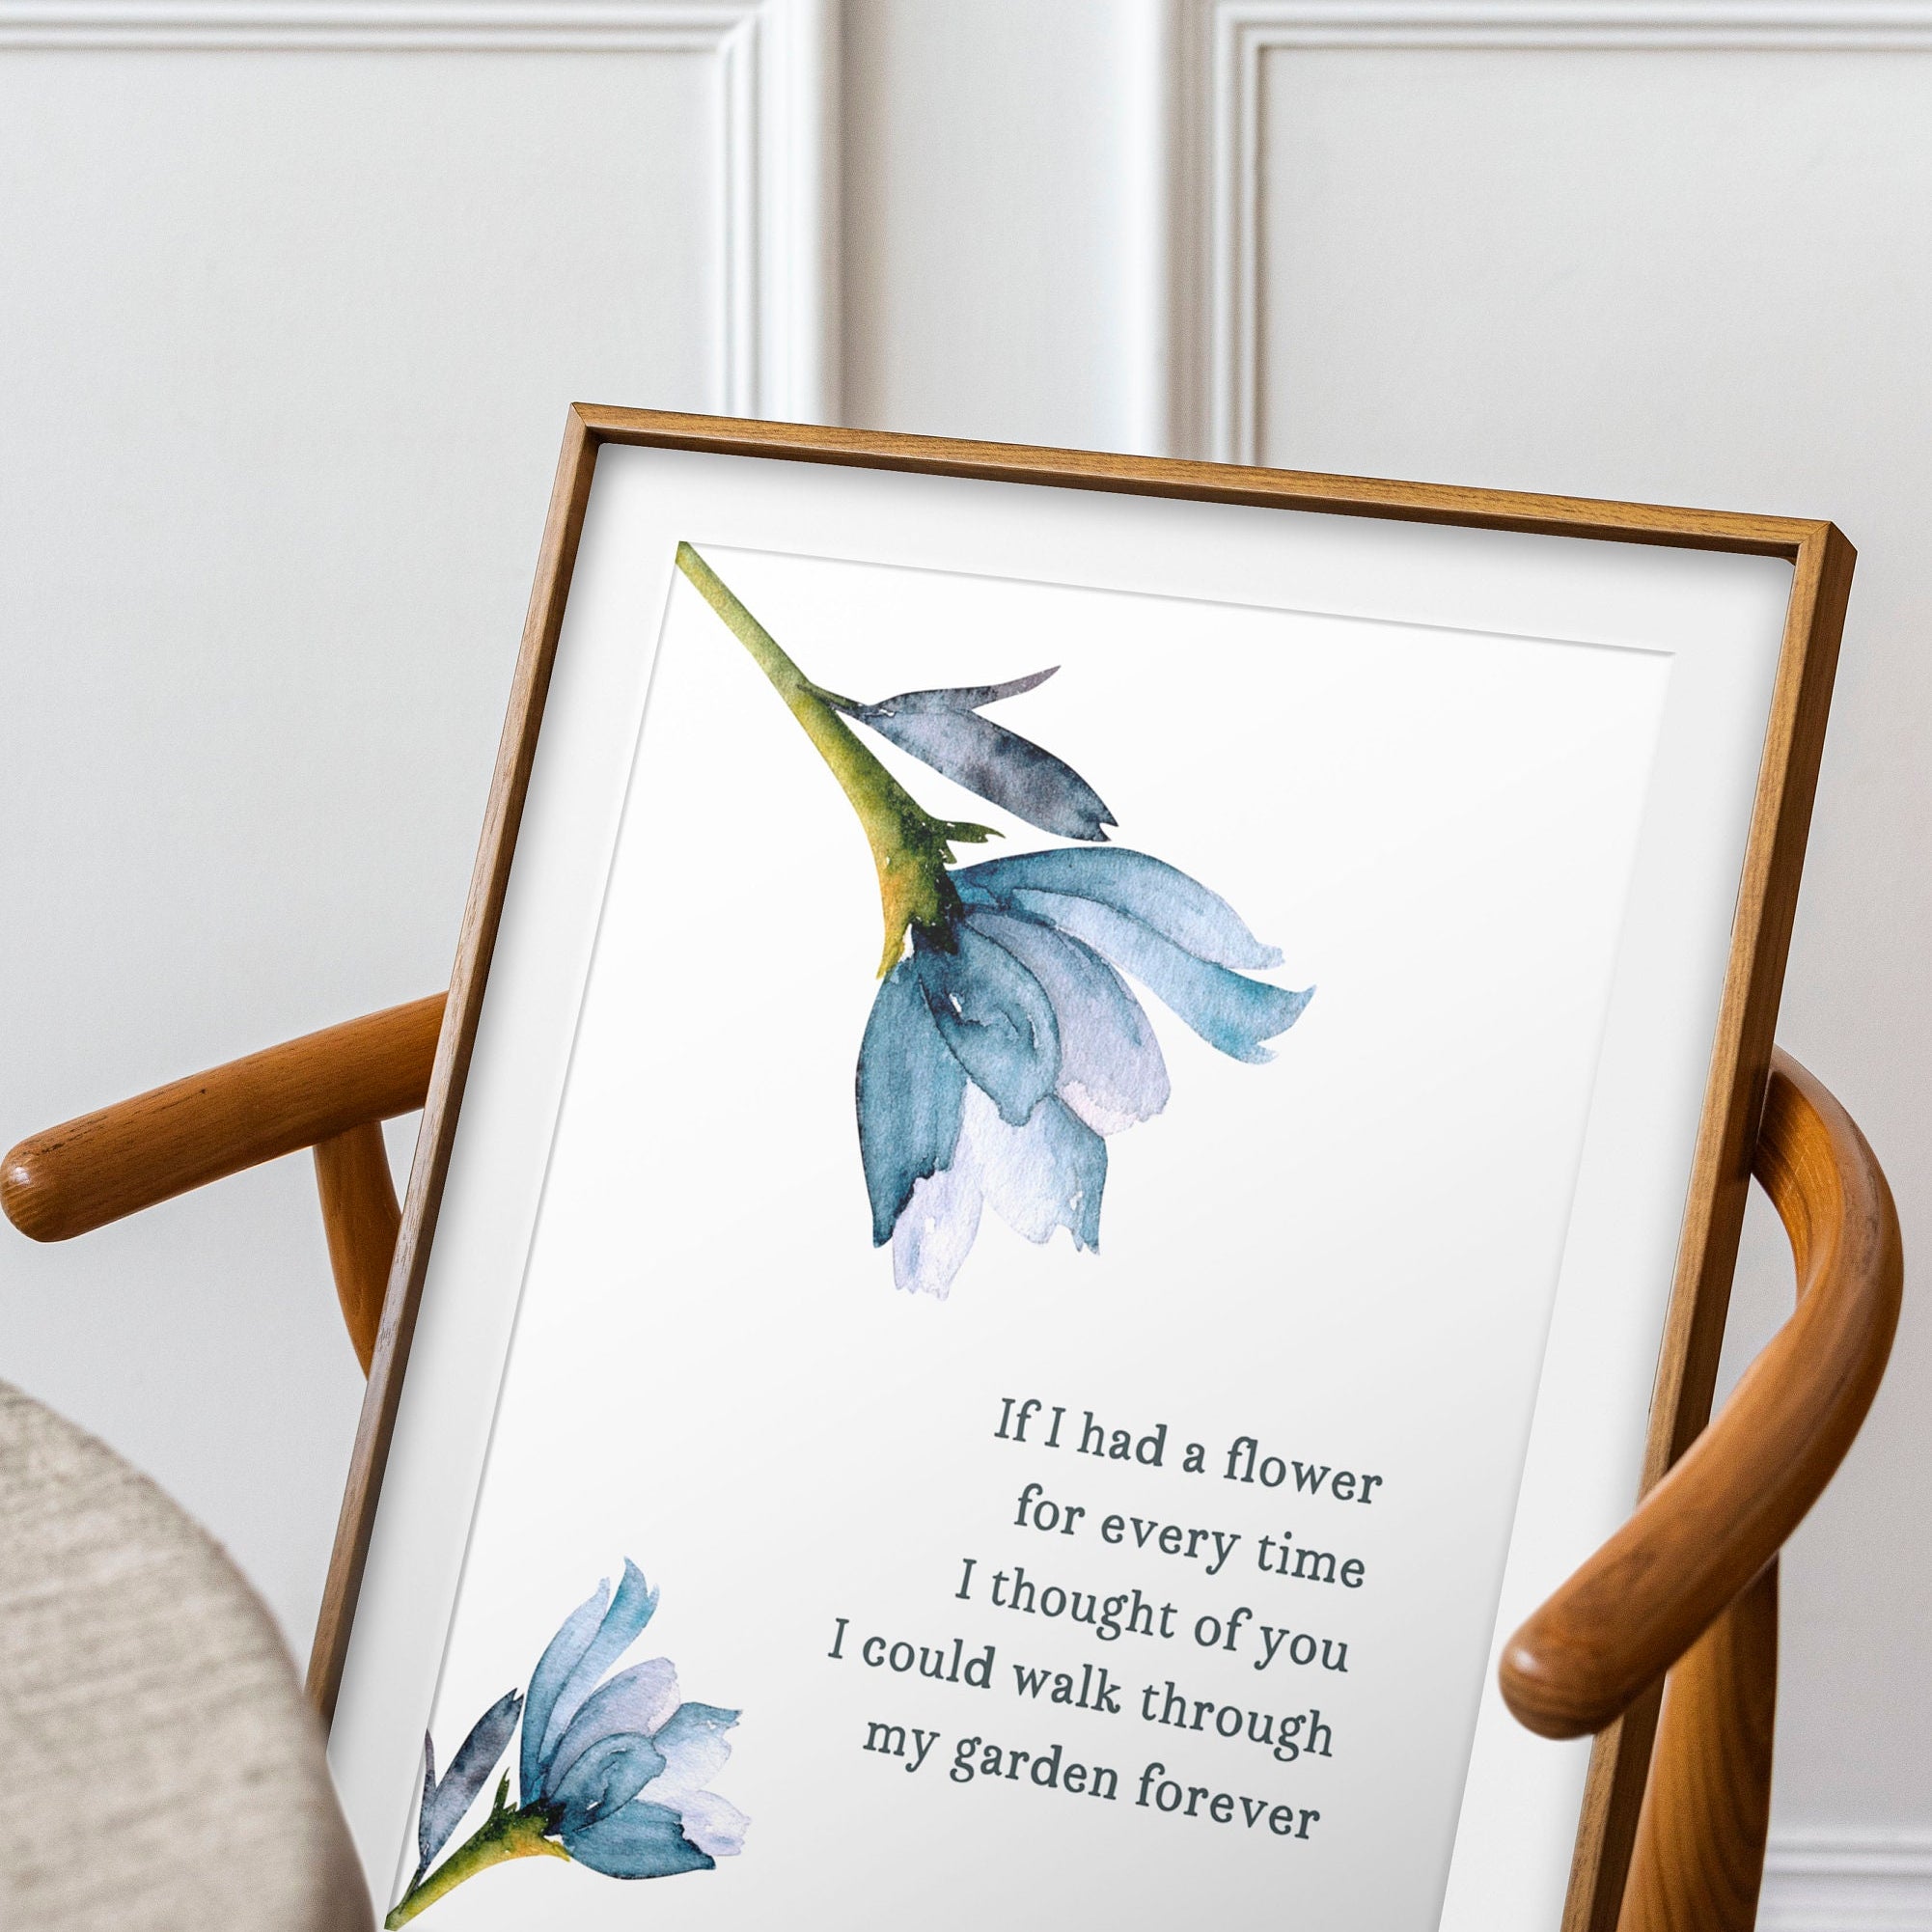 If I Had A Flower For Every Time I Thought Of You Love Quote Print, Alfred Tennyson Inspirational Wall Art Prints, Romantic Bookish Decor